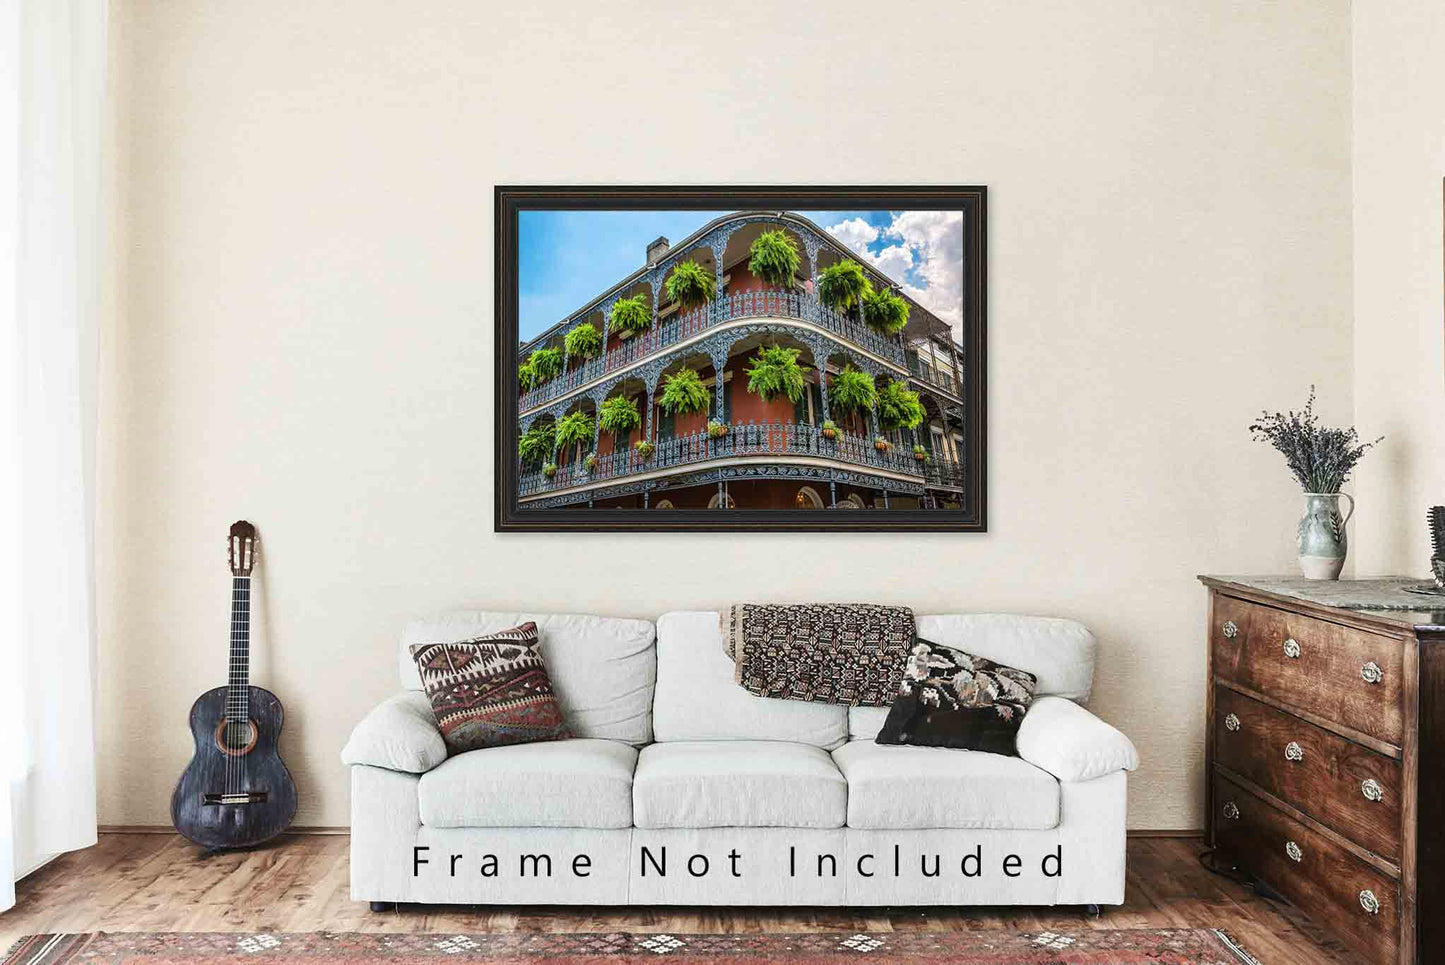 NOLA Photography Print (Not Framed) Picture of Corner Building with Hanging Ferns in New Orleans Louisiana Wall Art French Quarter Decor